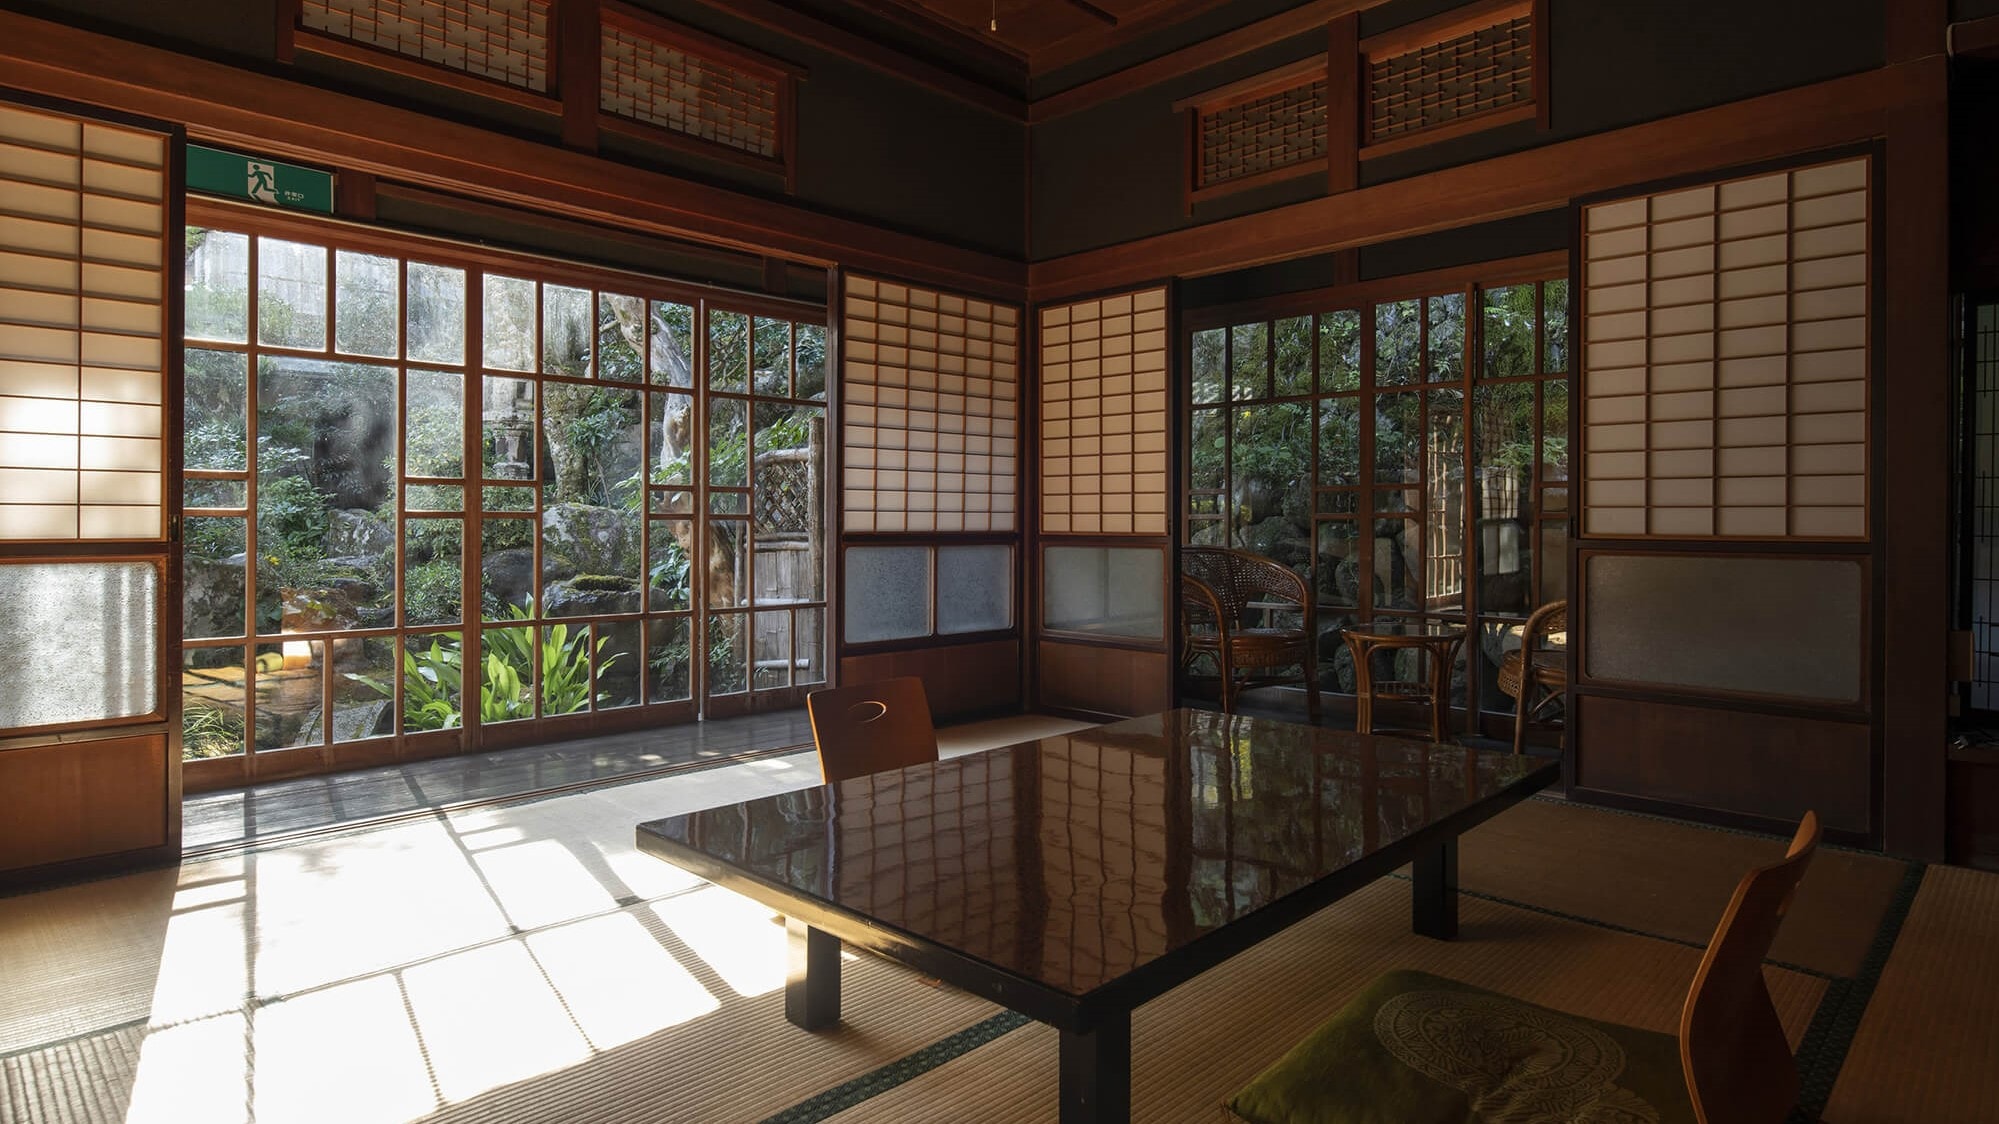 Japanese-style room with a view of the garden